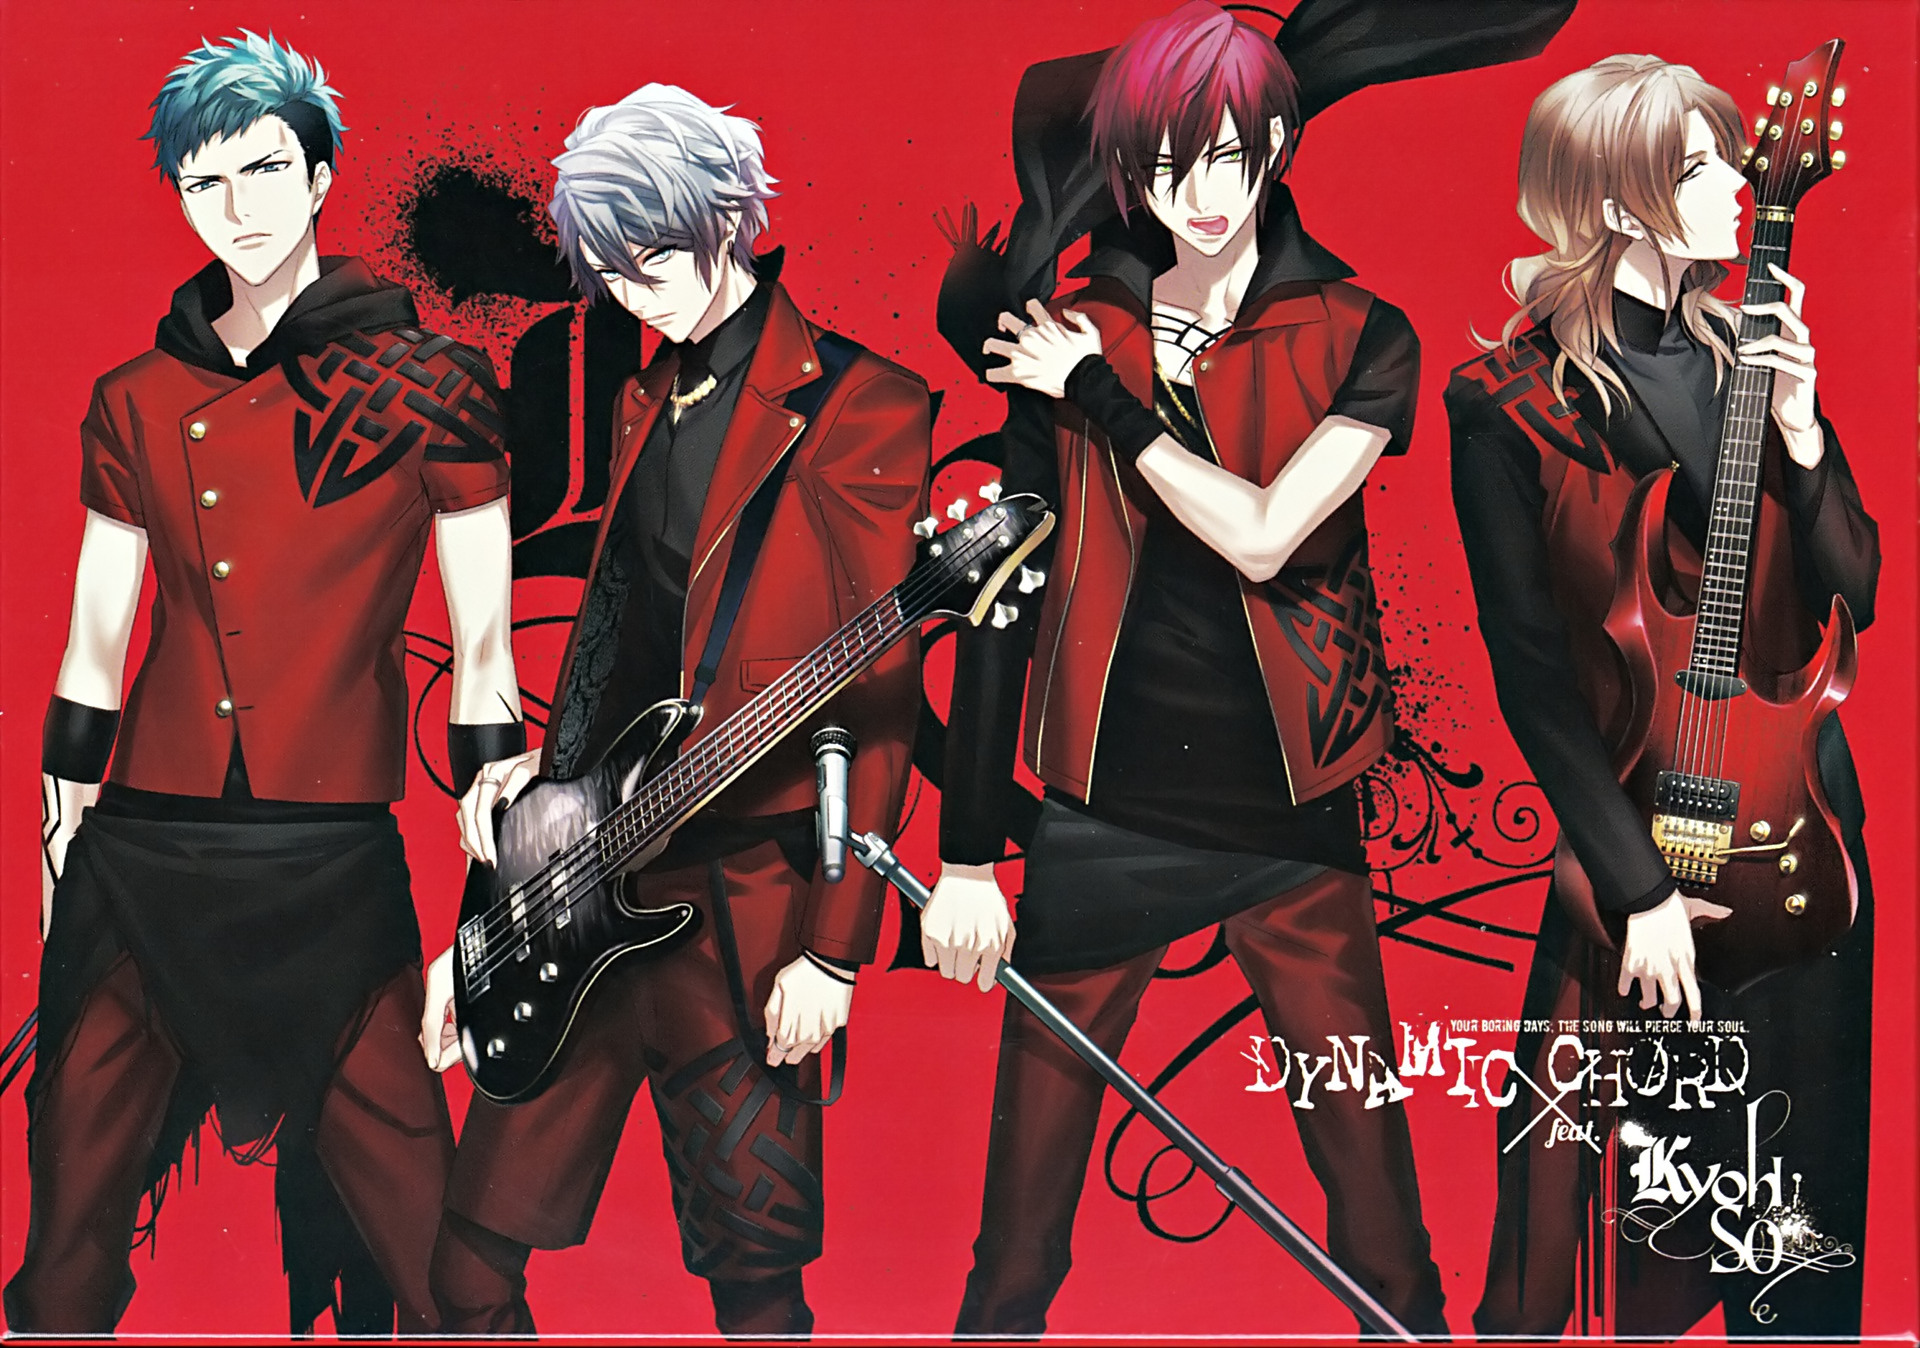 anime, dynamic chord cell phone wallpapers